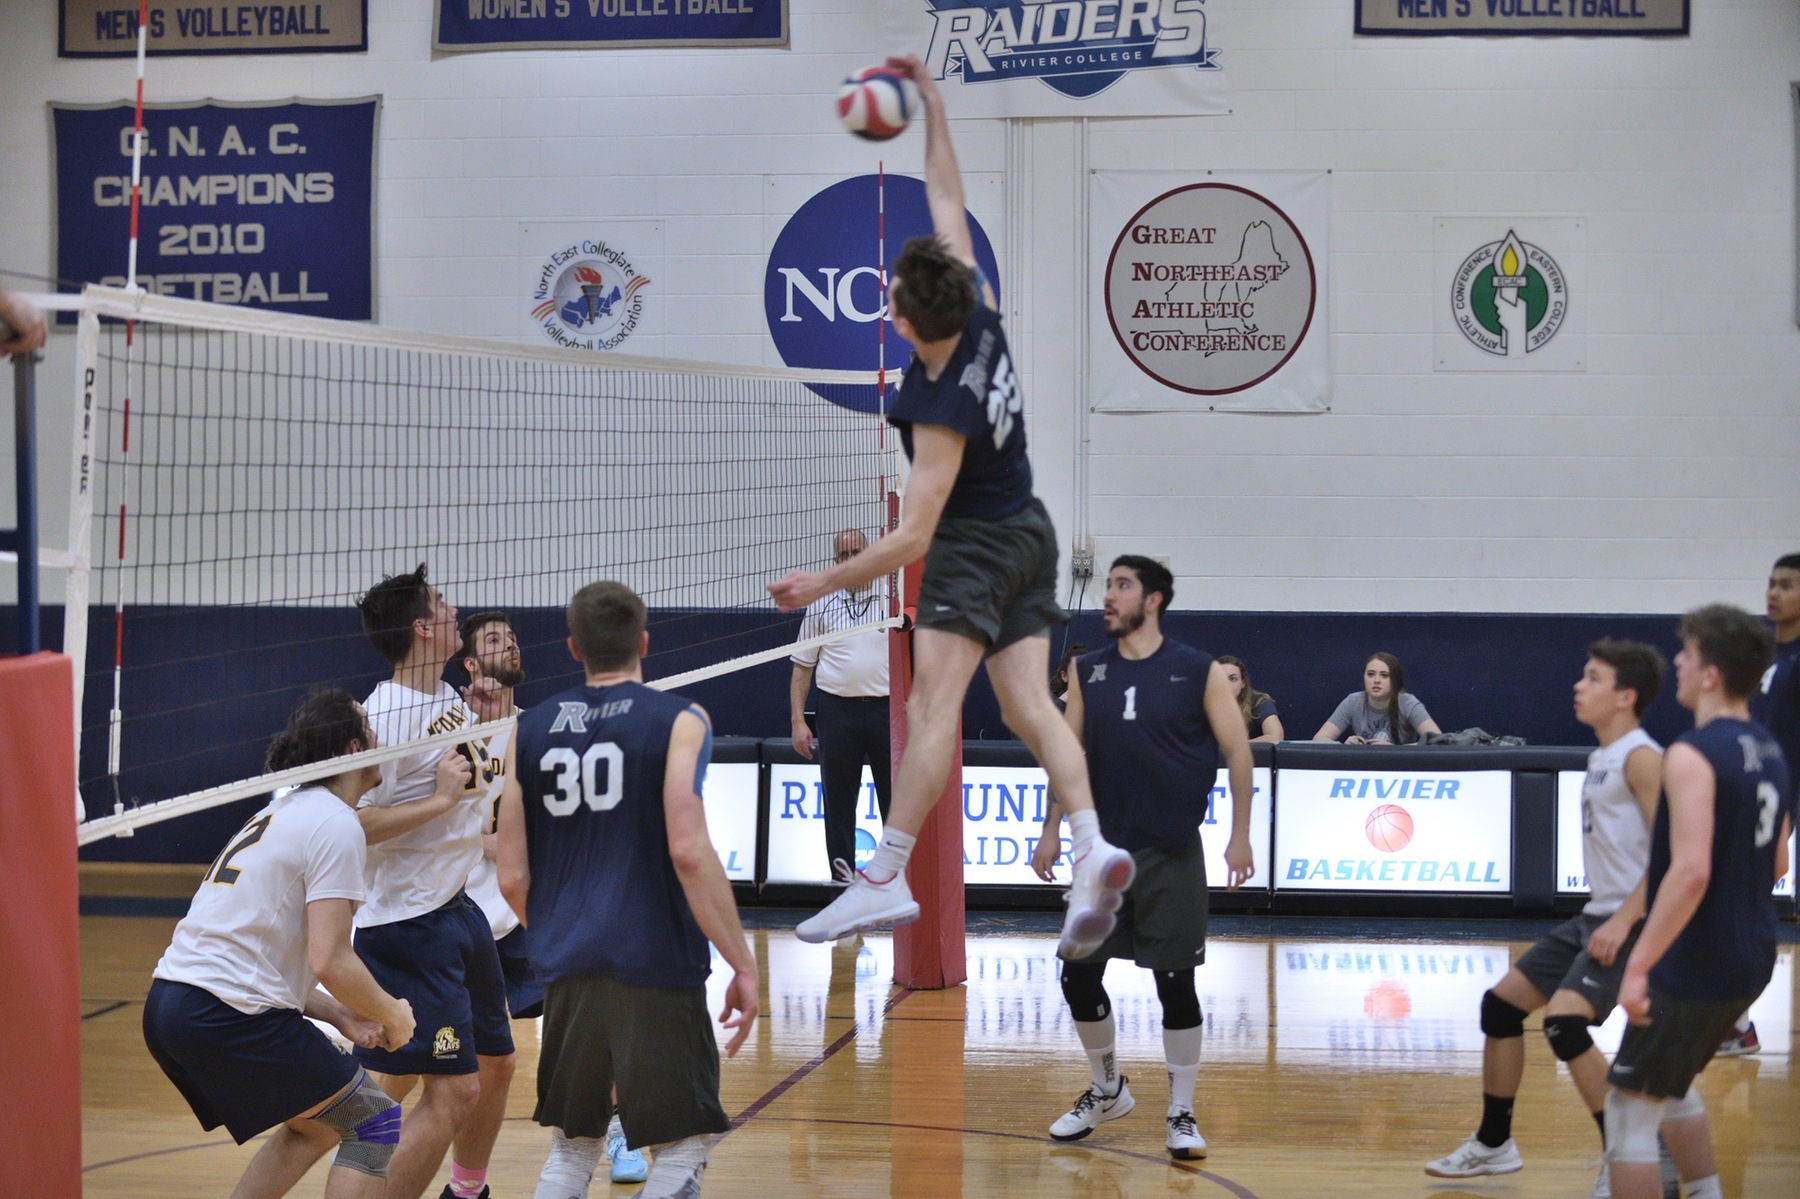 Men's Volleyball: Raiders suffer loss to Mustangs, 1-3.